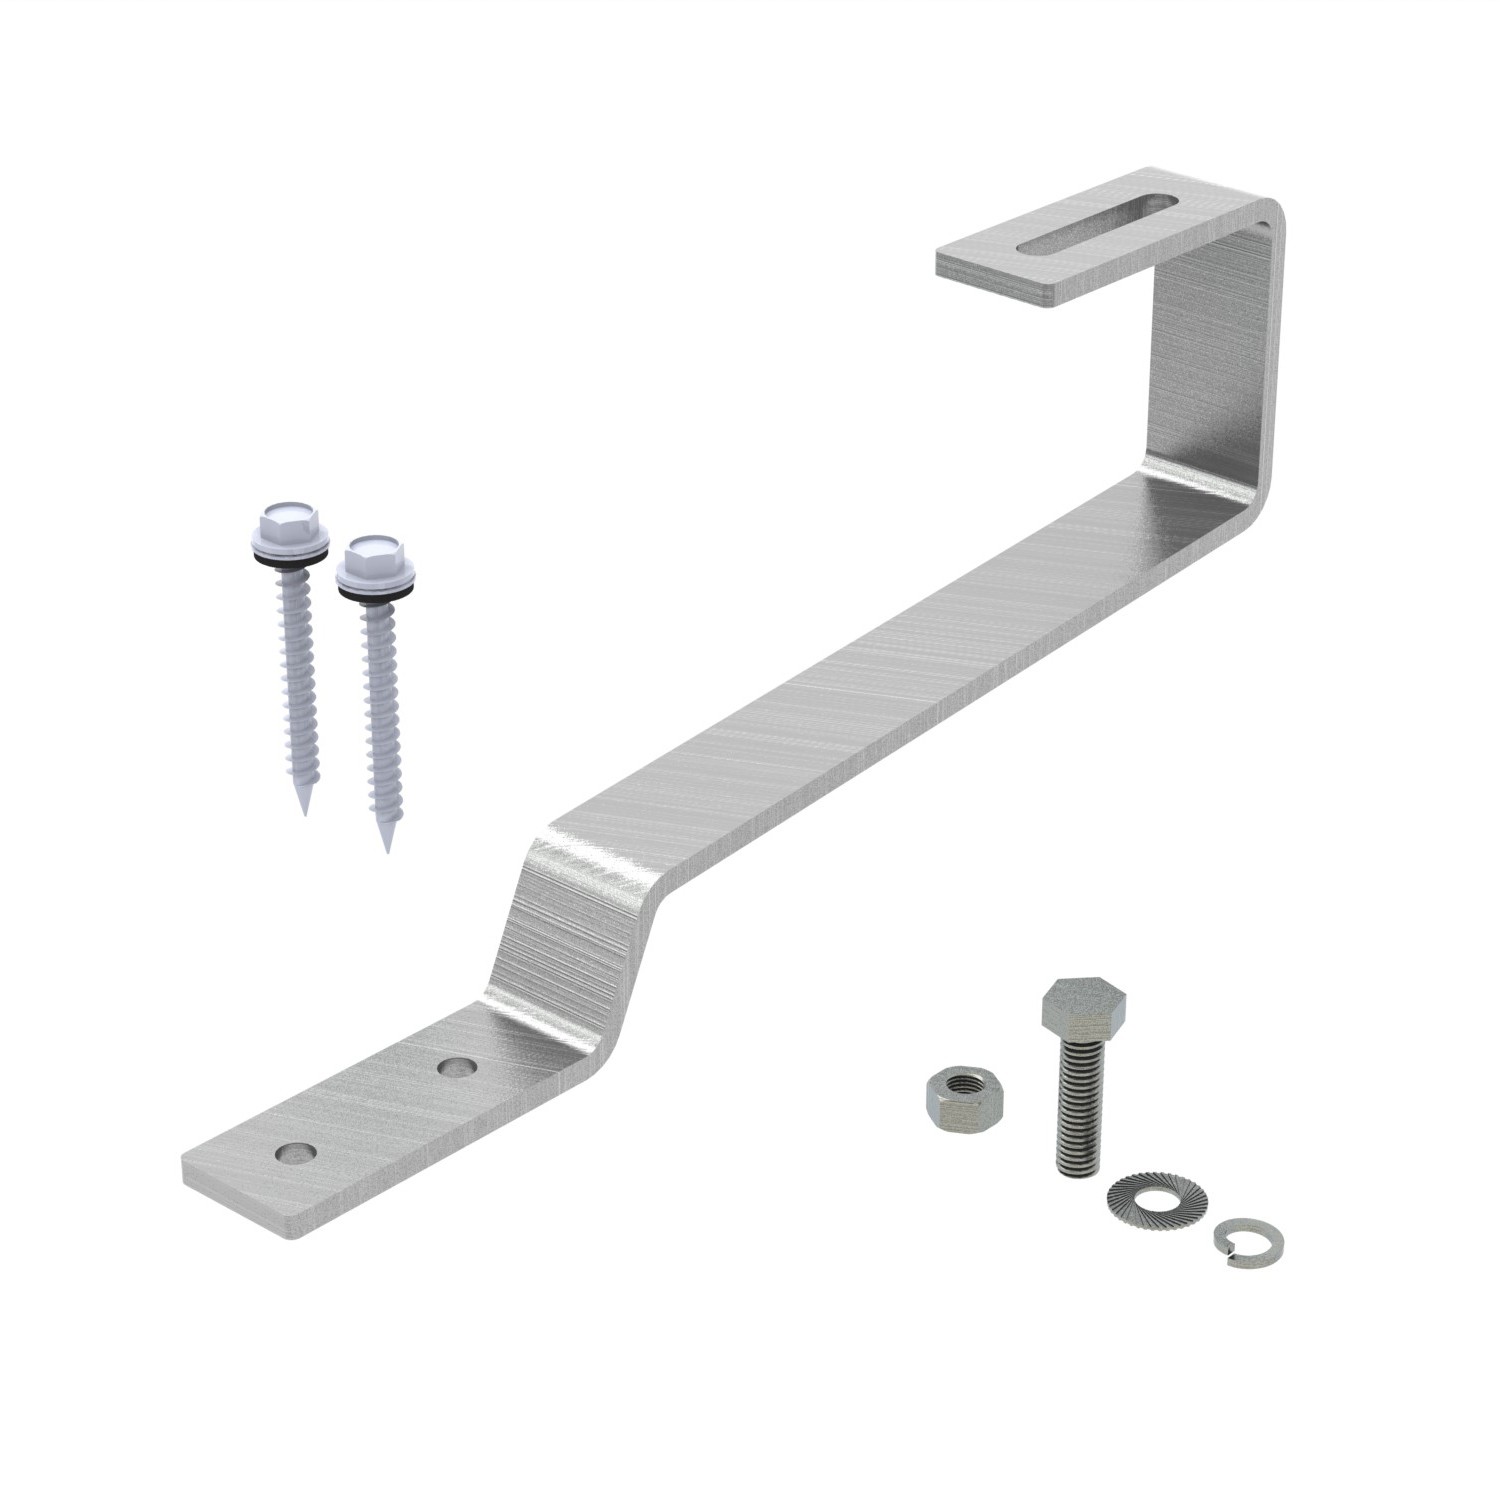 Cost-effective China-made solar bracket stainless steel hooks solar photovoltaic hooks